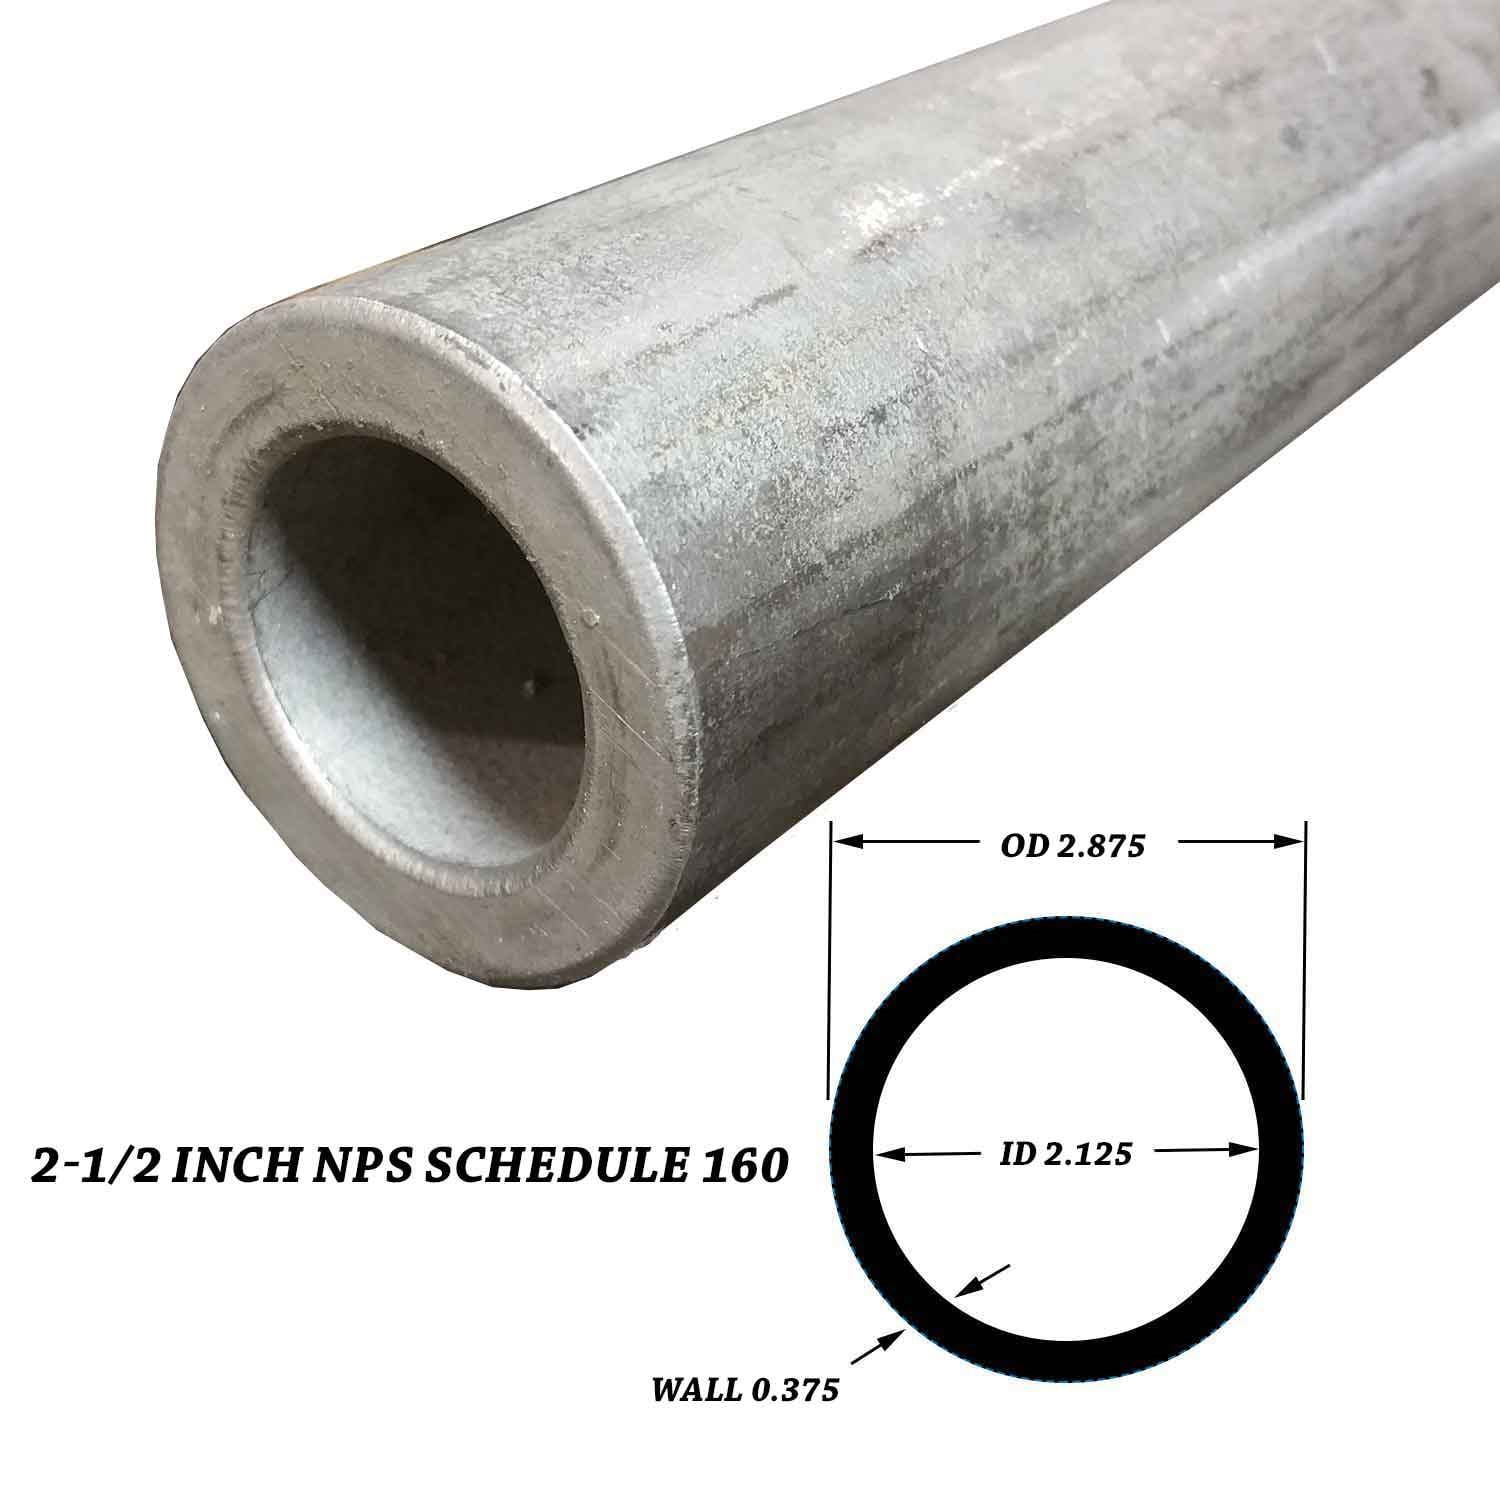 304 Stainless Steel Pipe, 2-1/2 inch NPS, 36 inches long, Schedule 160S